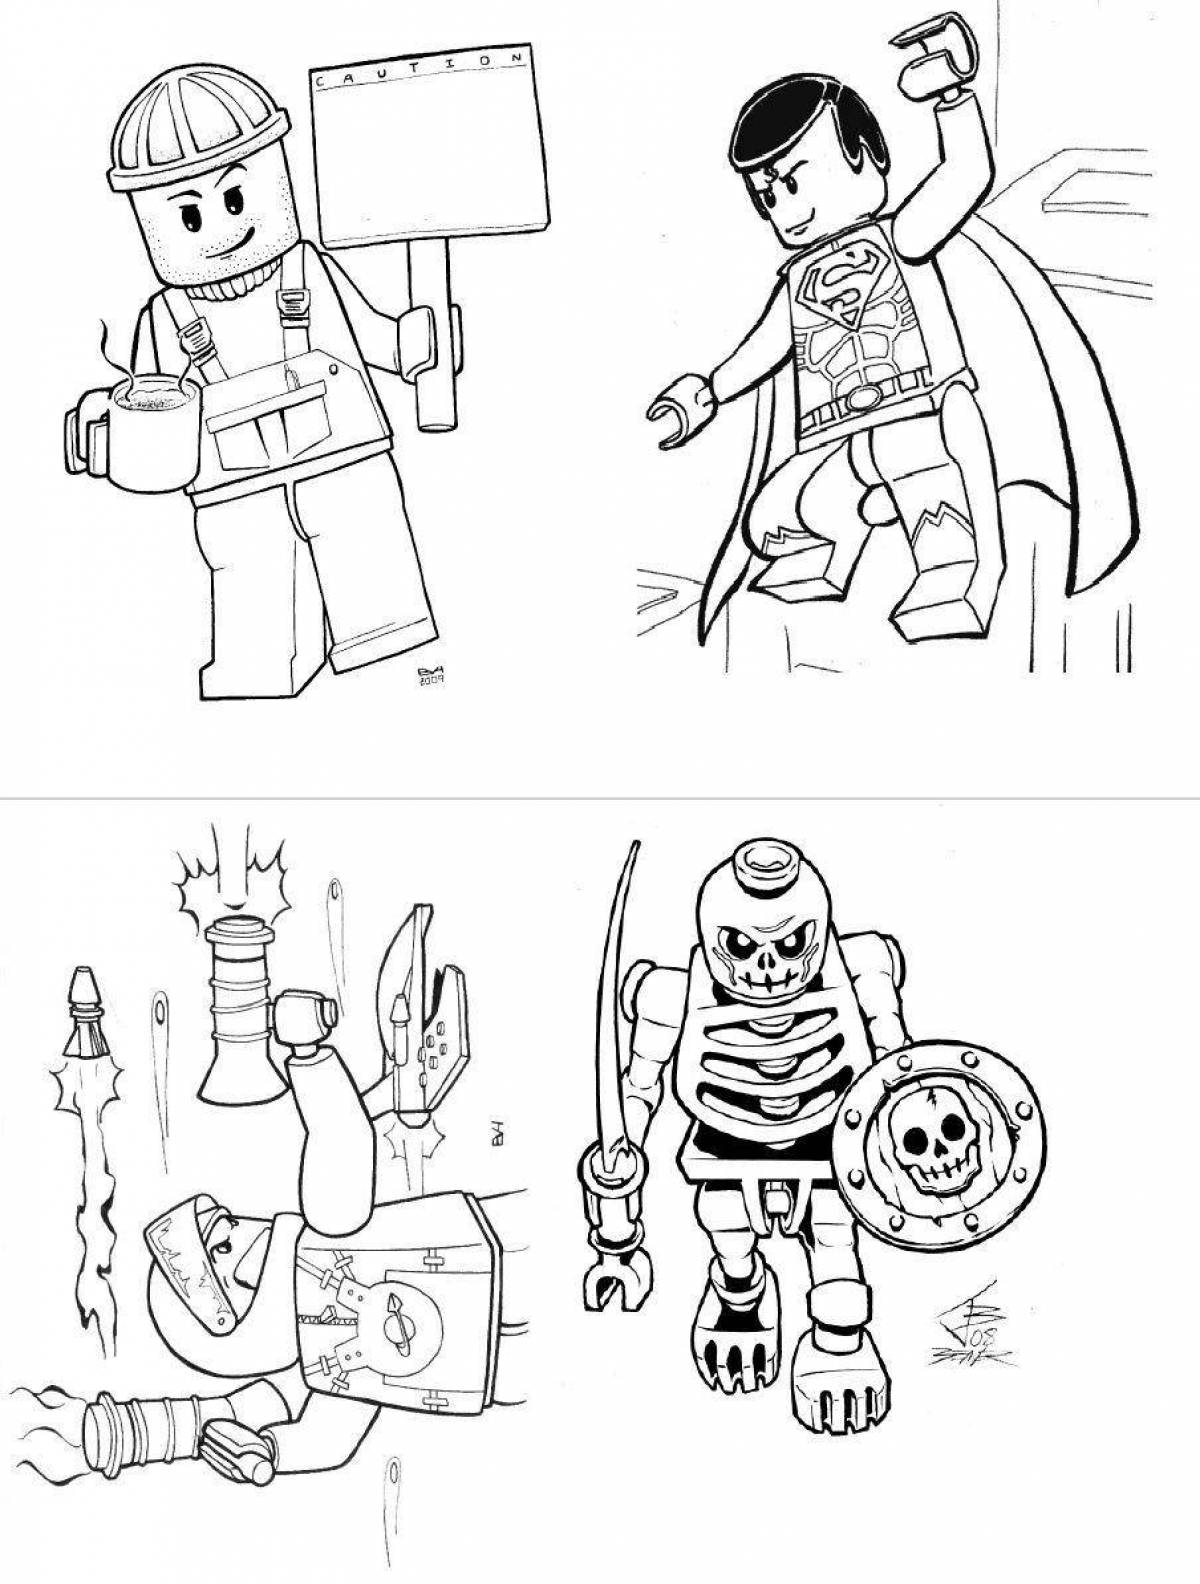 Charming robloxers coloring book